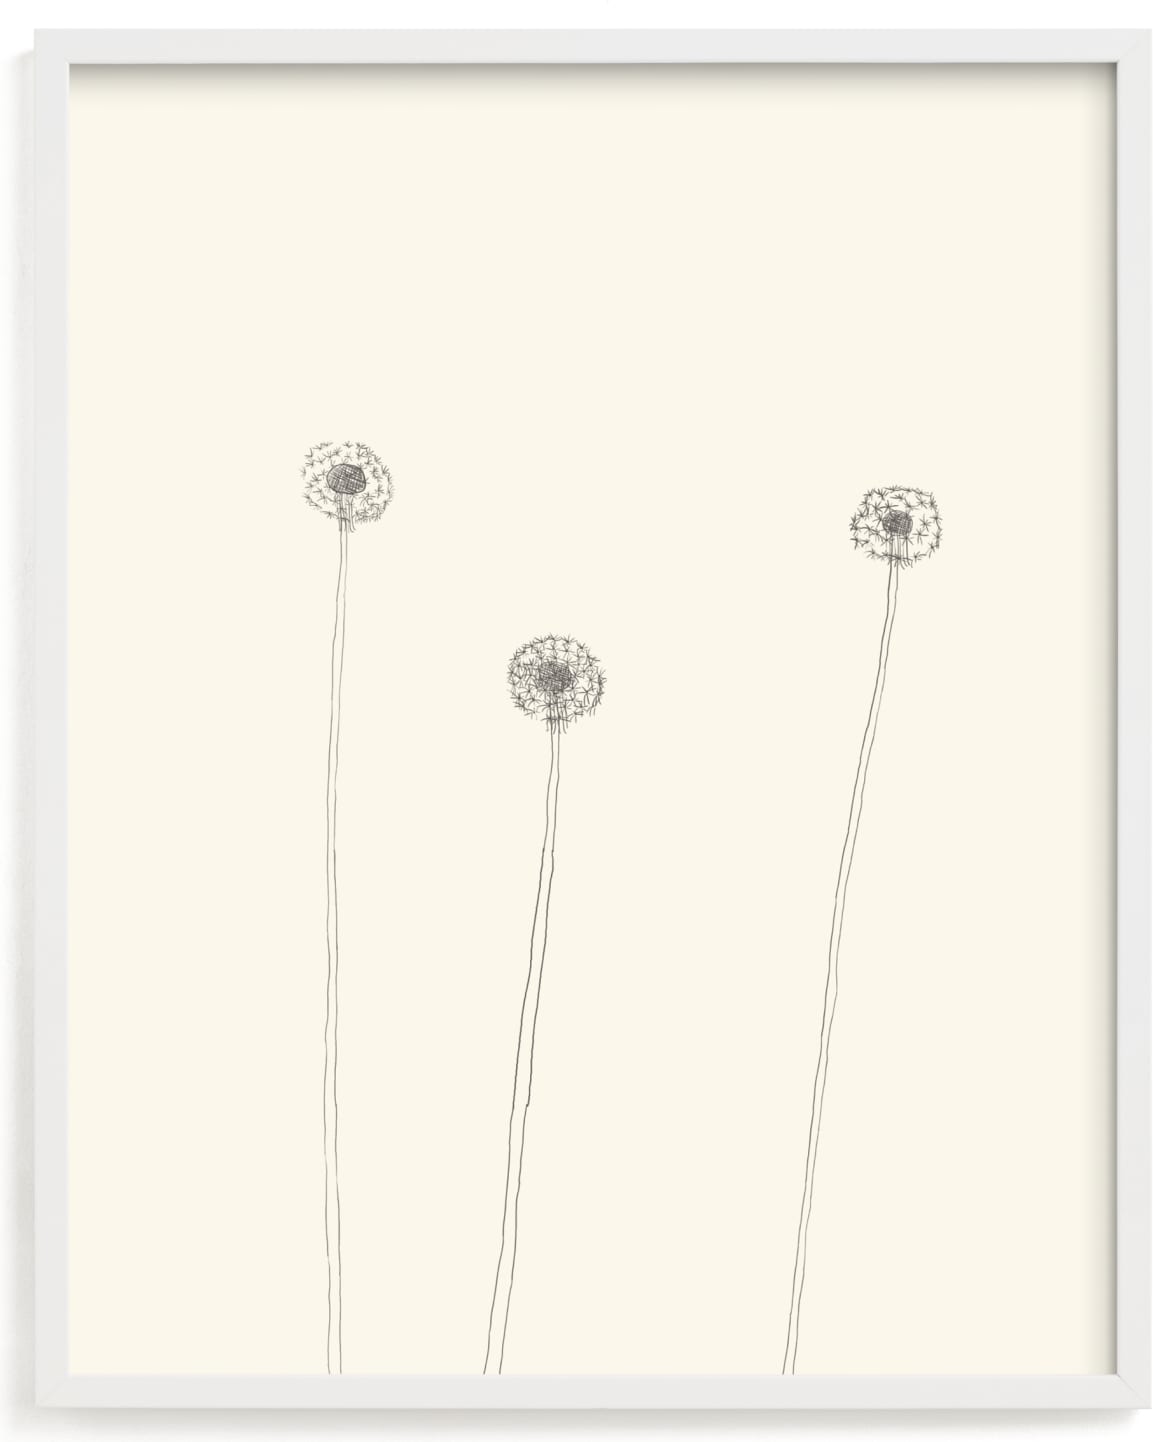 This is a white art by Jorey Hurley called Dandelions.